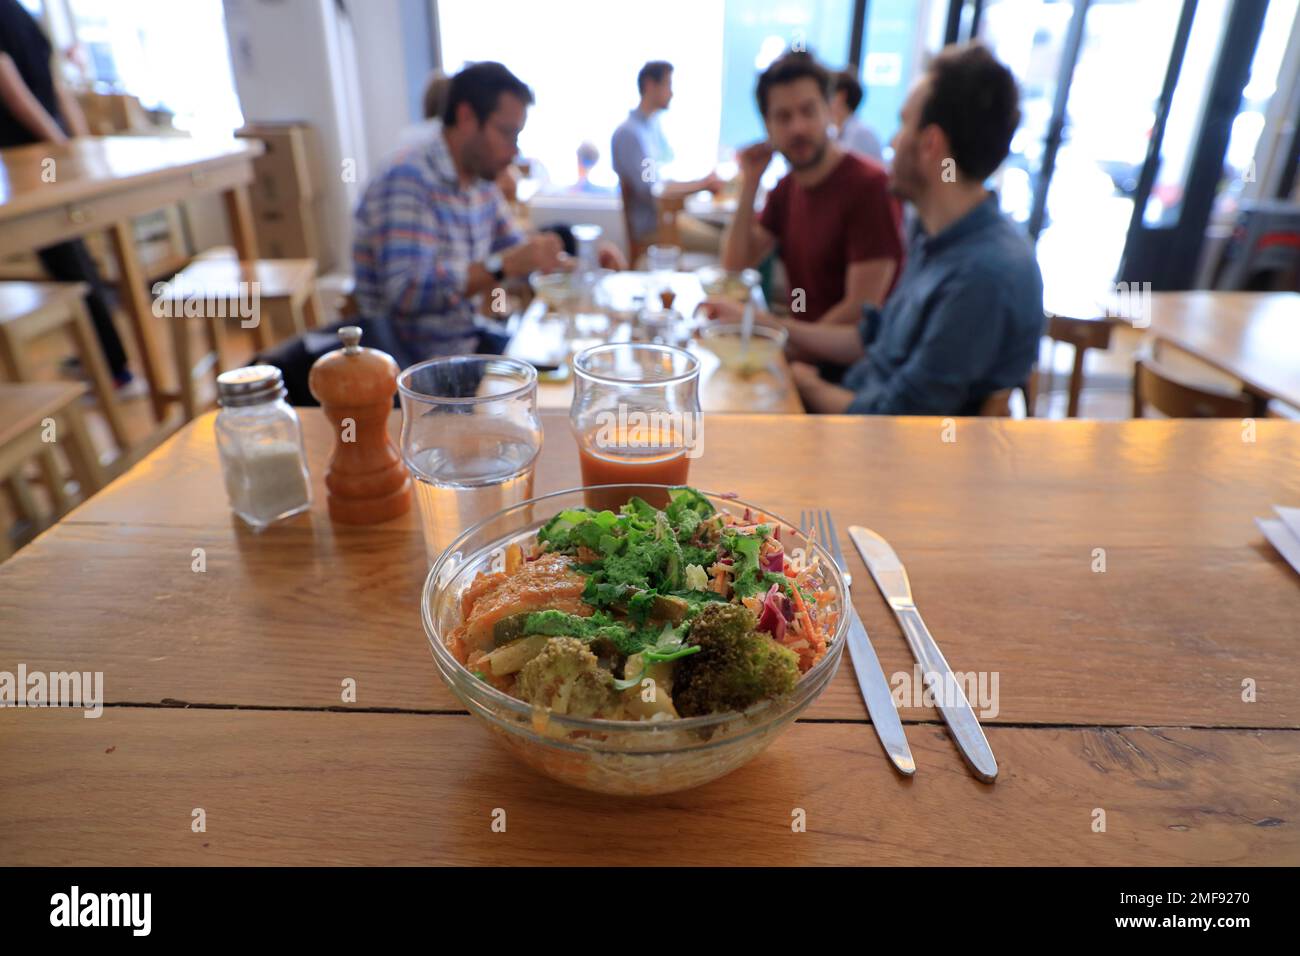 A bowl of salmon with vegetable served in Le Bichat, a eco-friendly and vegetarian friendly restaurant serving organic and farm to table food and drinks in 10th arrondissement of Paris.France Stock Photo